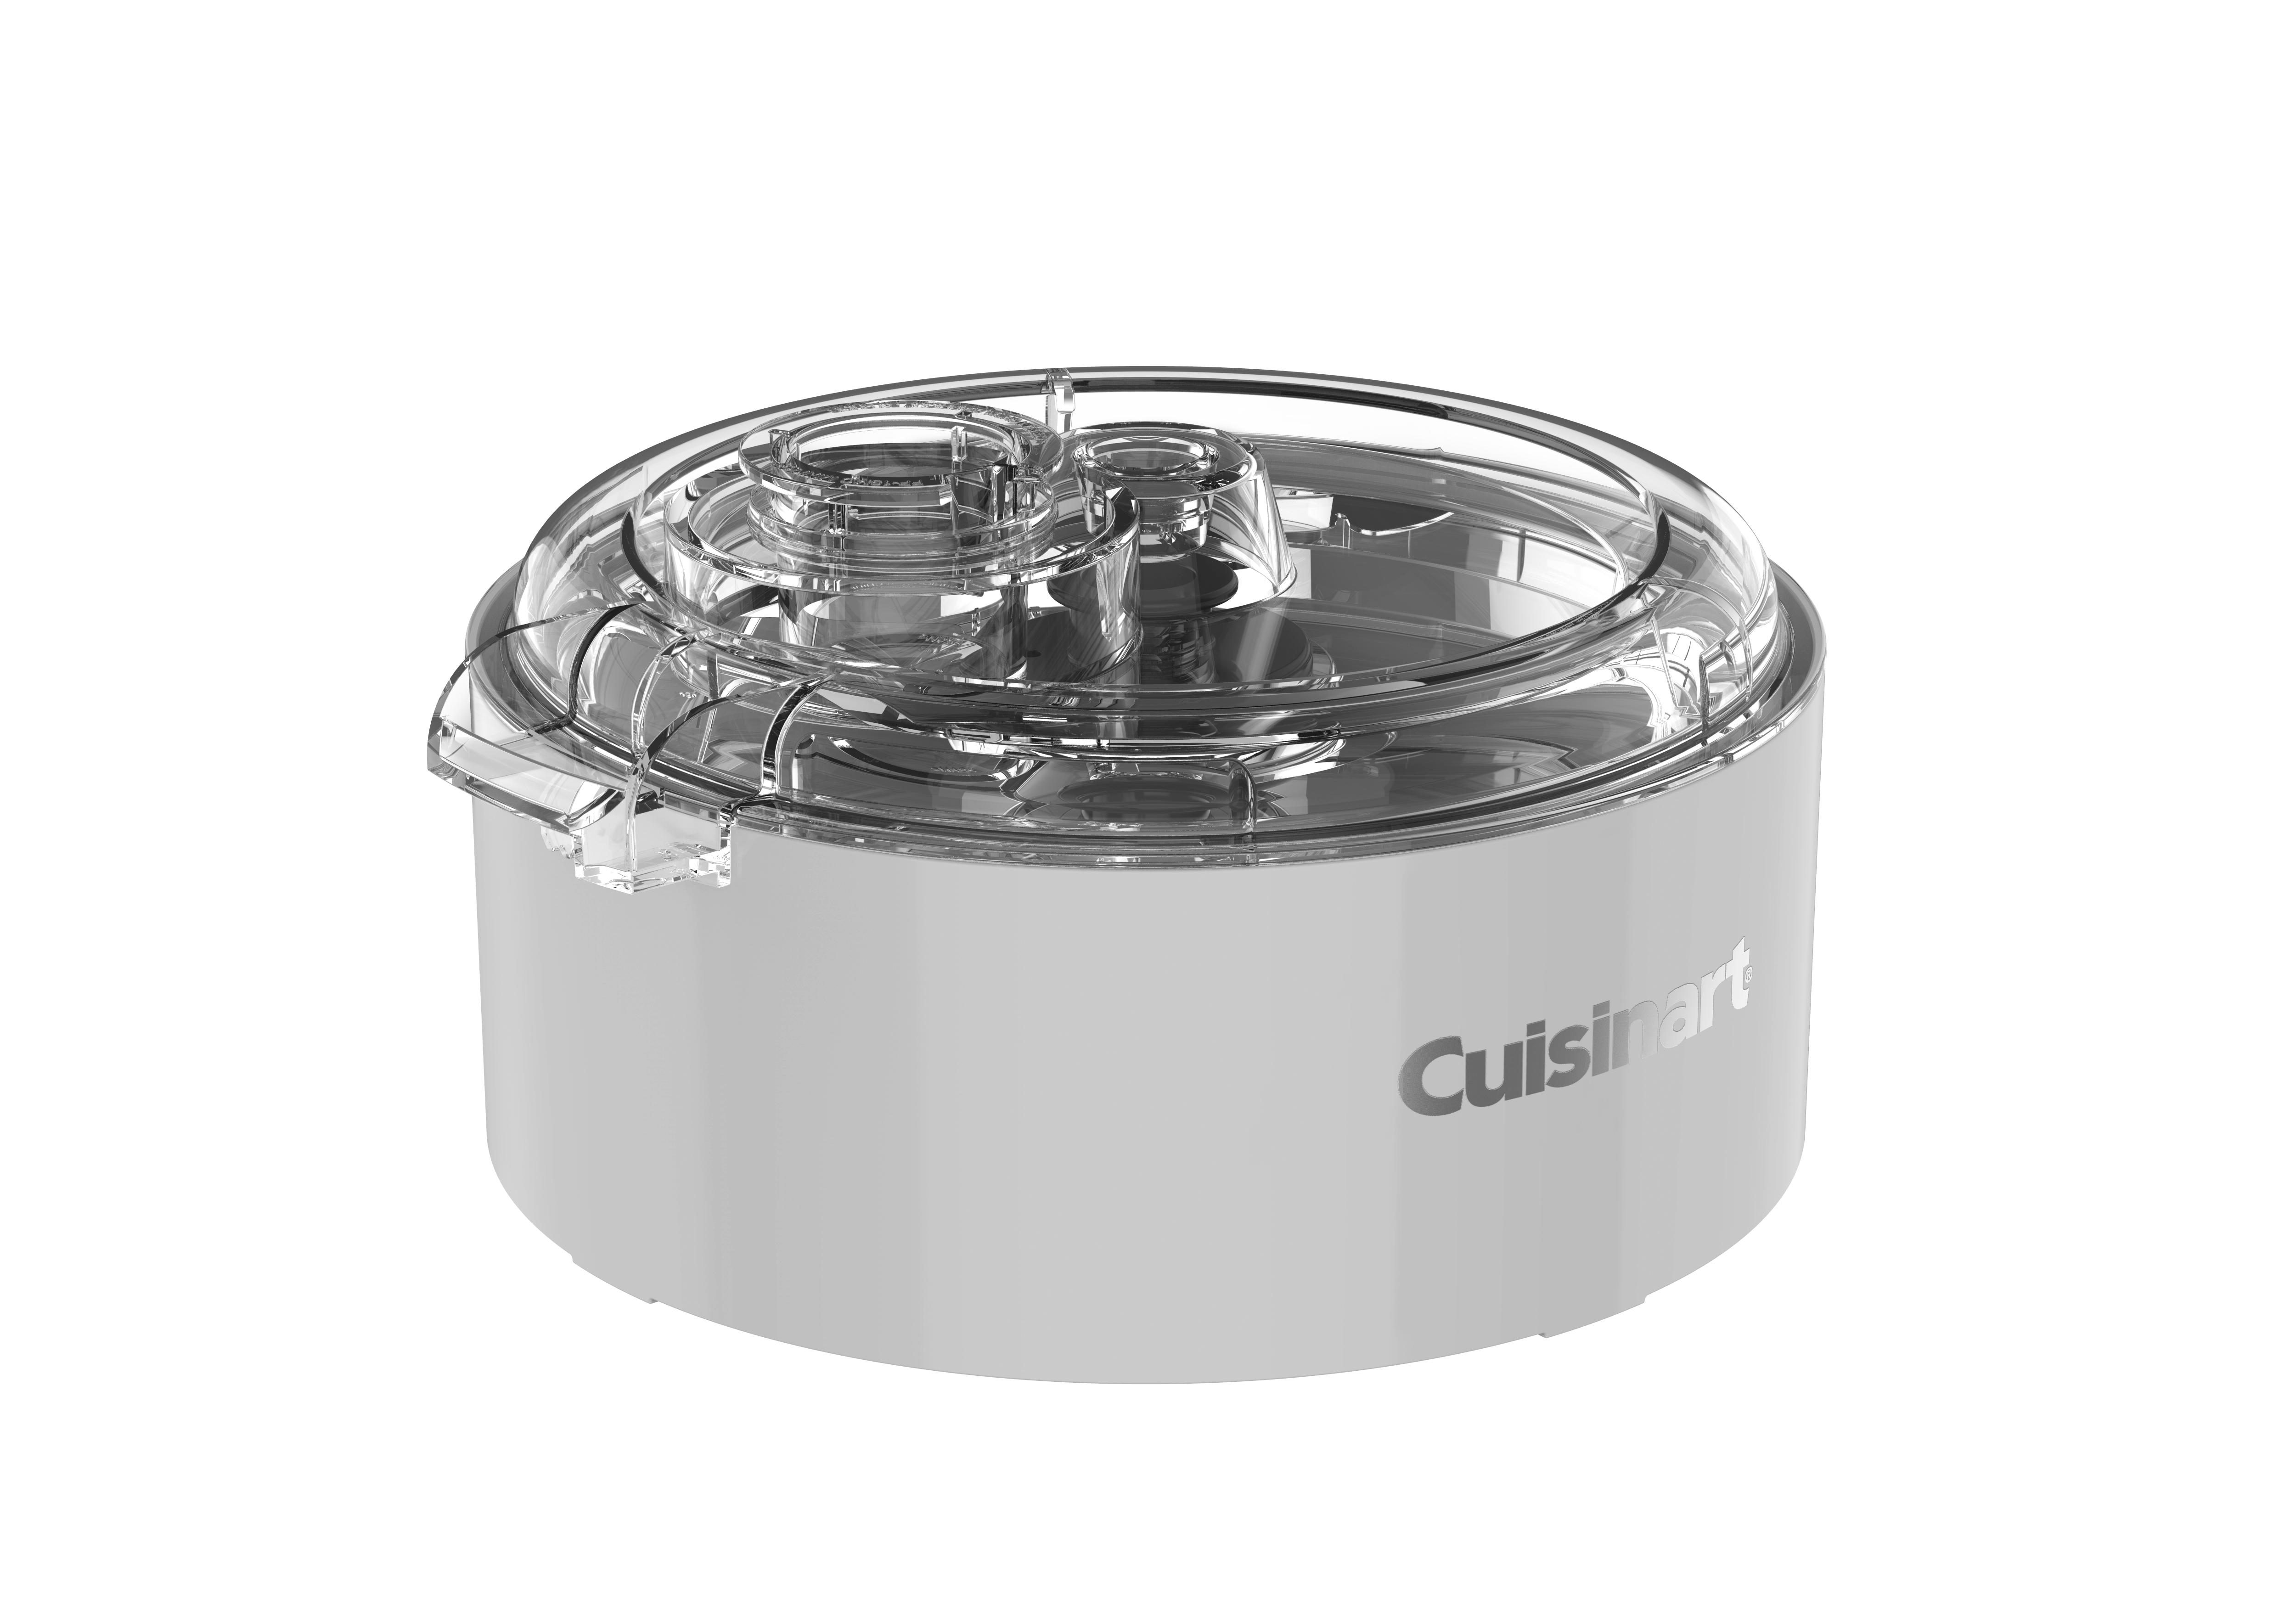 Food Processor Replacement Parts & Accessories - Cuisinart